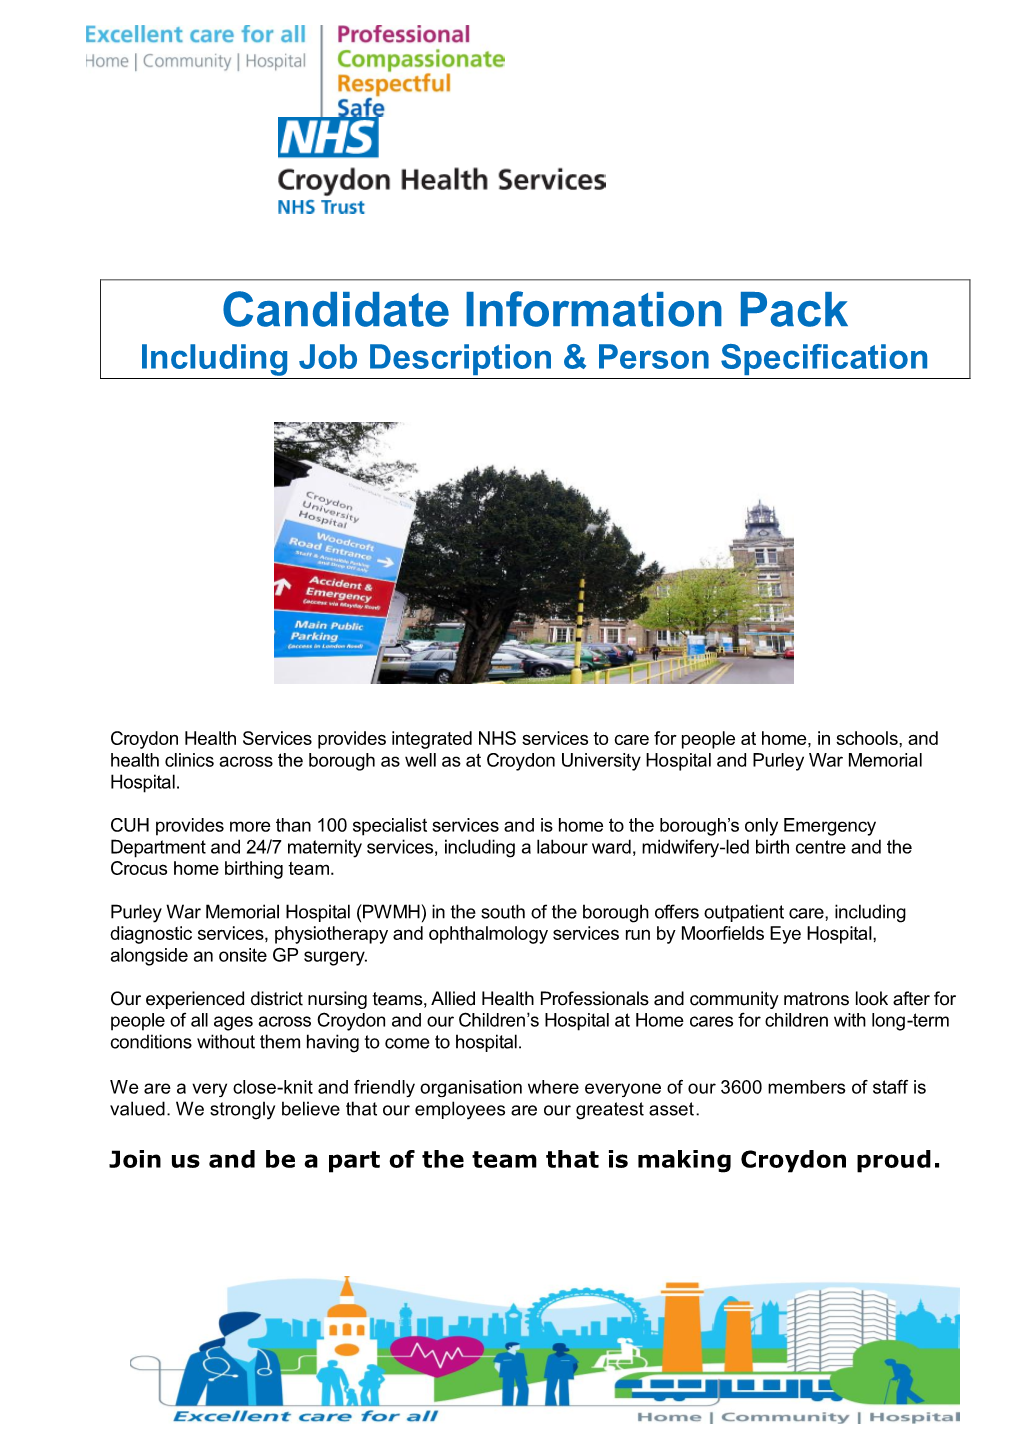 Candidate Information Pack Including Job Description & Person Specification